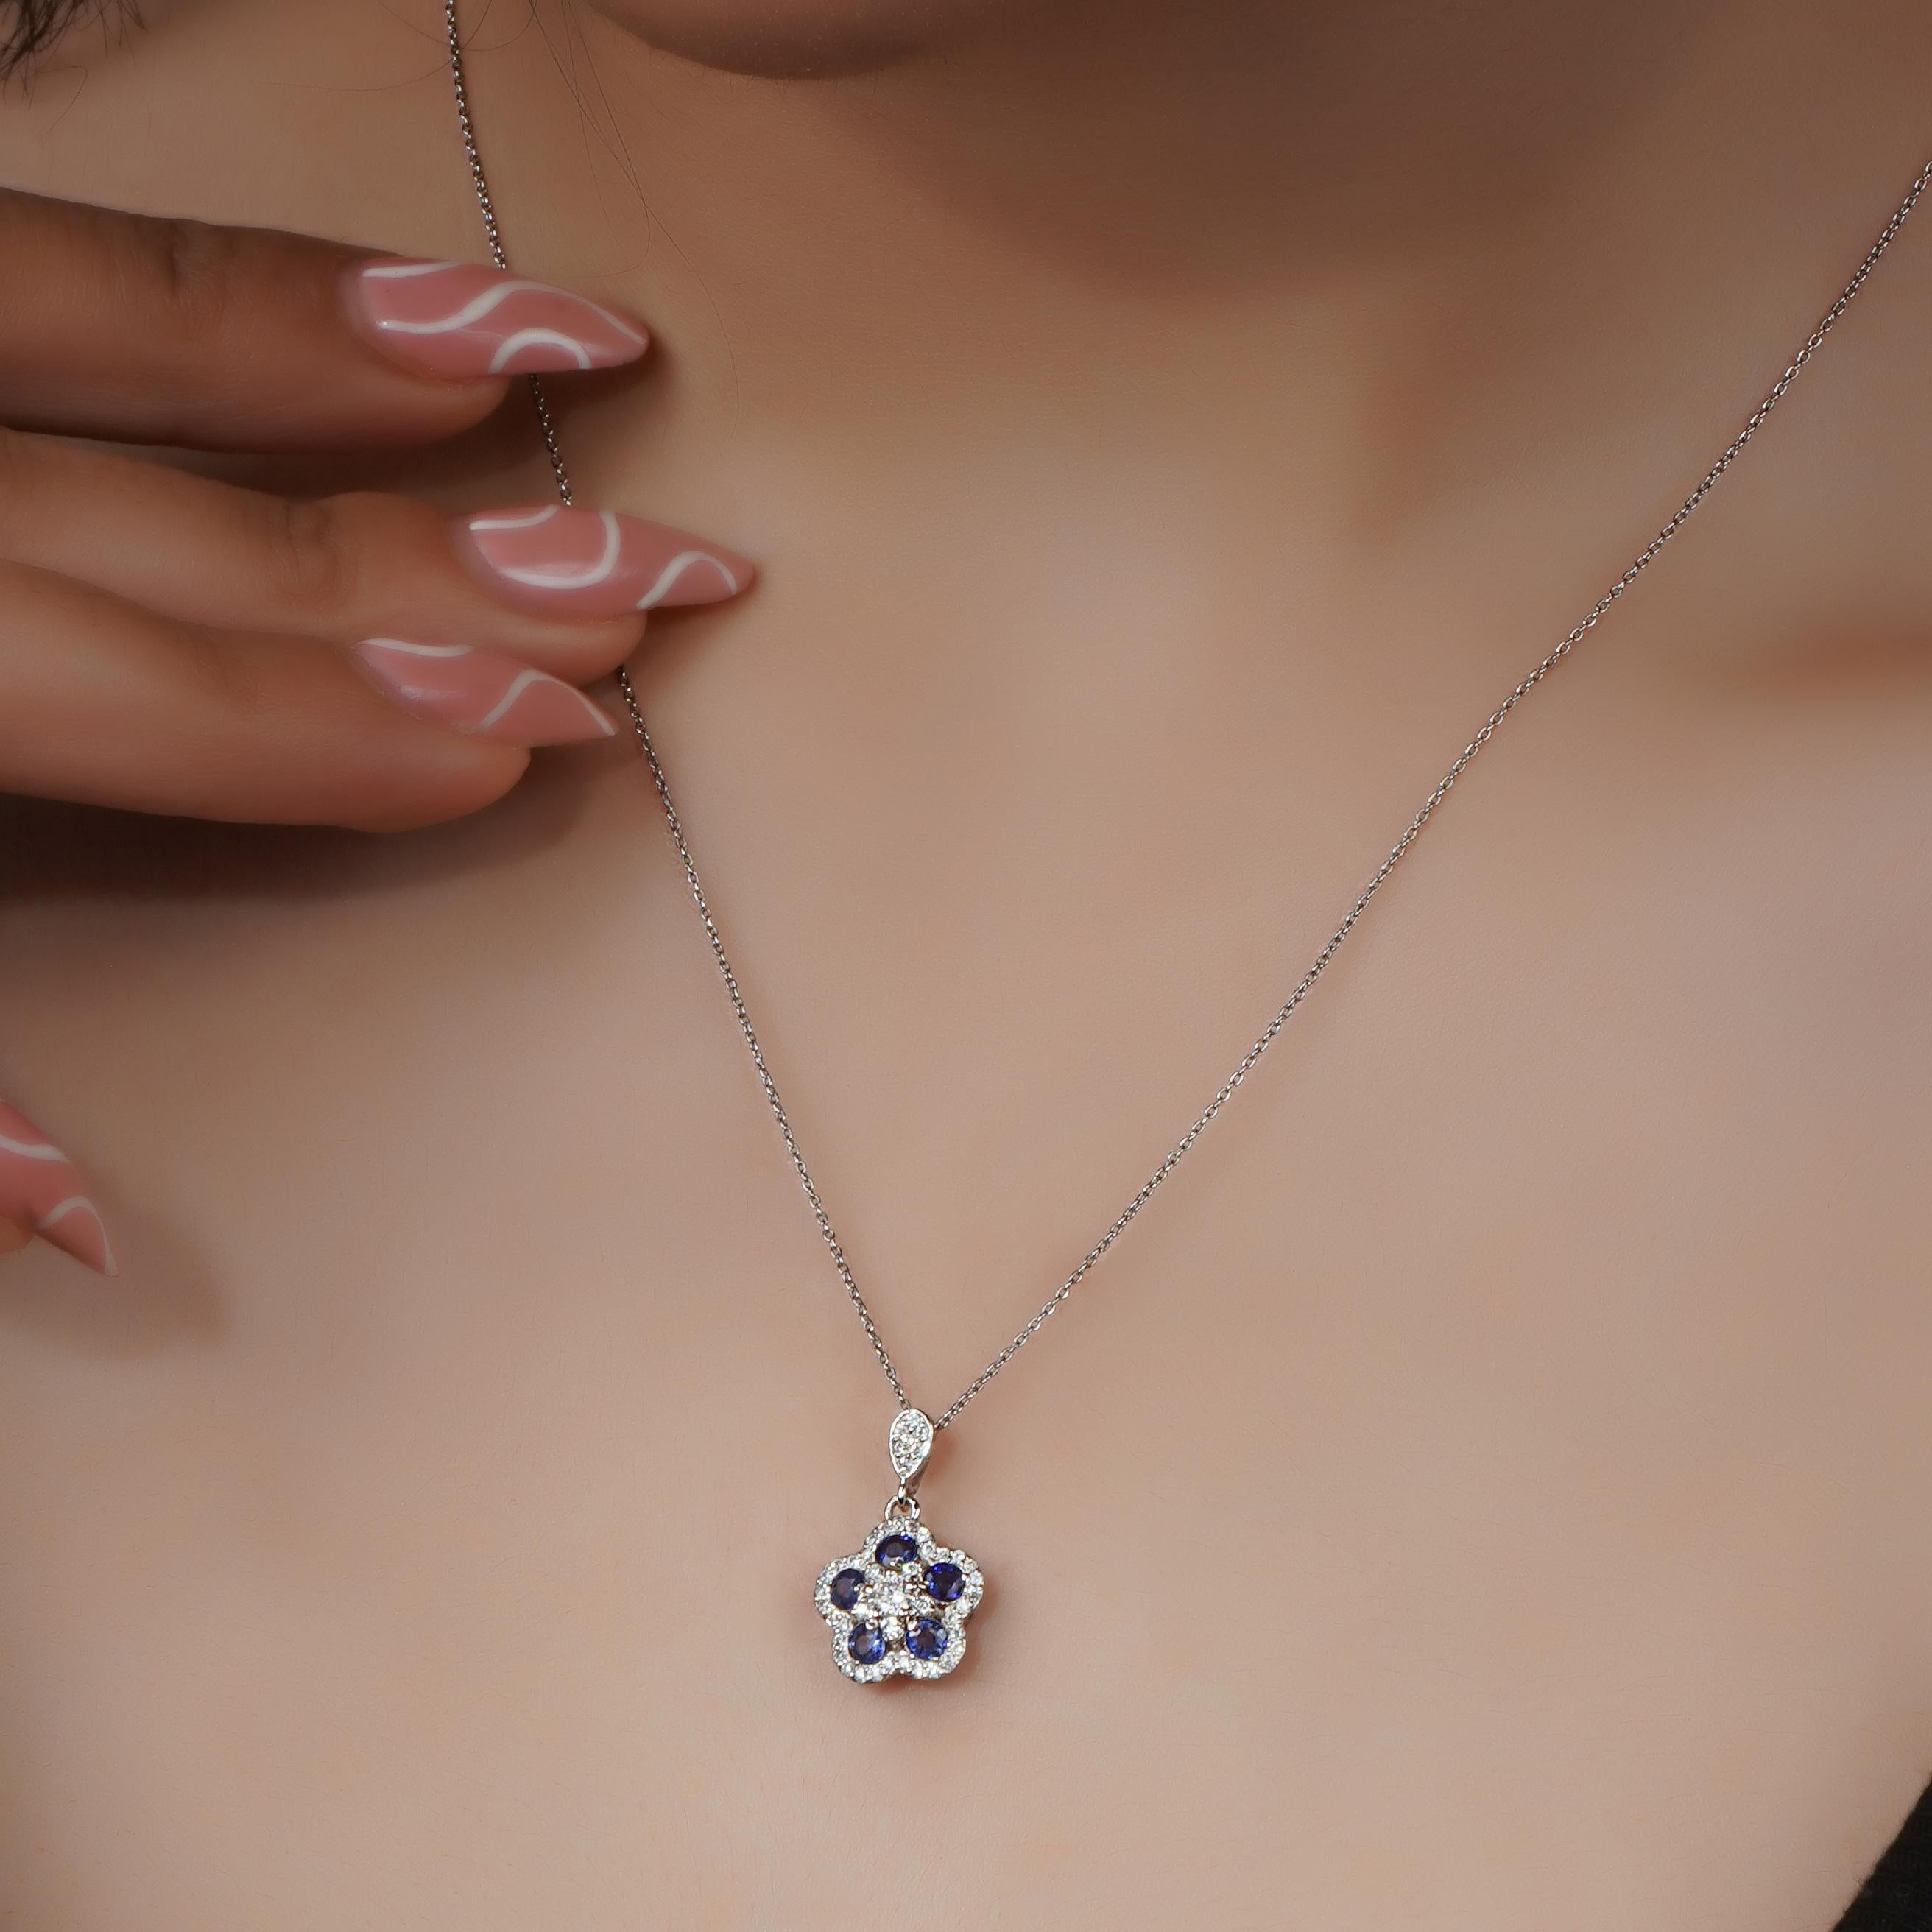 **This item is Necklace only and does not include the chain**

Do you love the color of the sky, the ocean, and the royal? Do you want to own a pendant that is elegant, durable, and affordable? If so, you will love the 18k Solid Gold Glory Sapphire